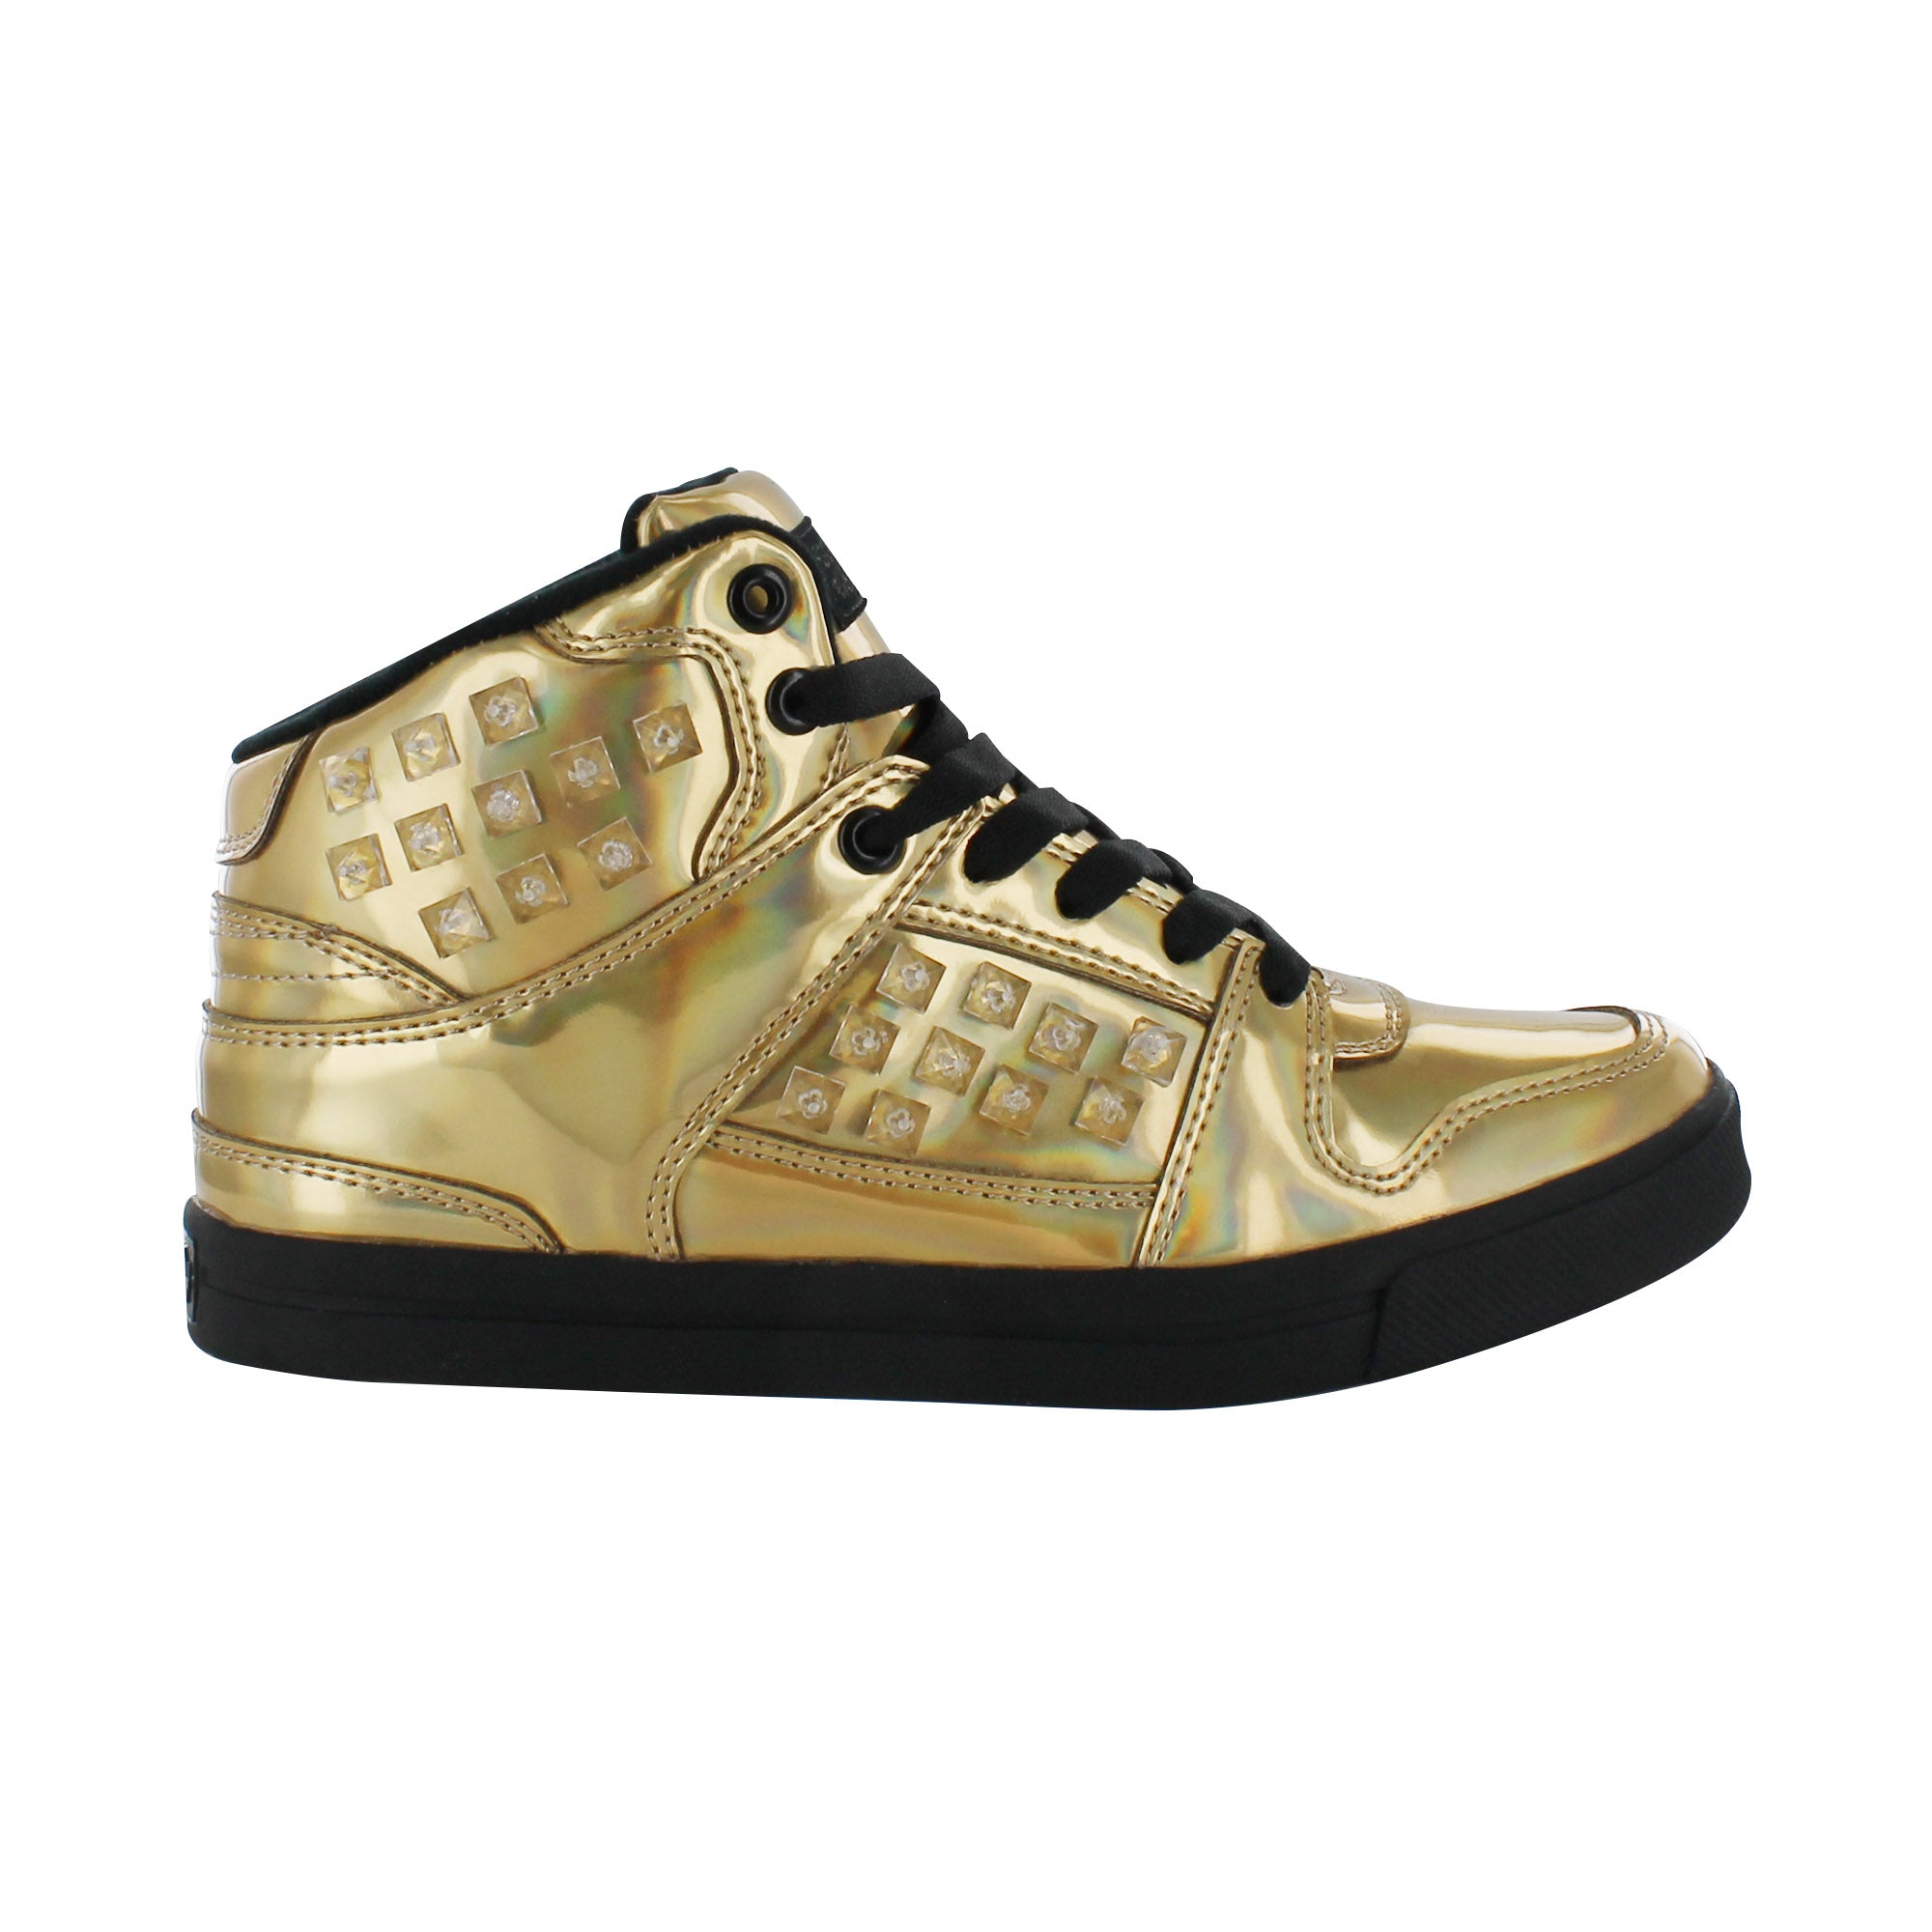 Adidas High Cut Hip Hop Shoes Black Gold Red, Men's Fashion, Footwear,  Sneakers on Carousell